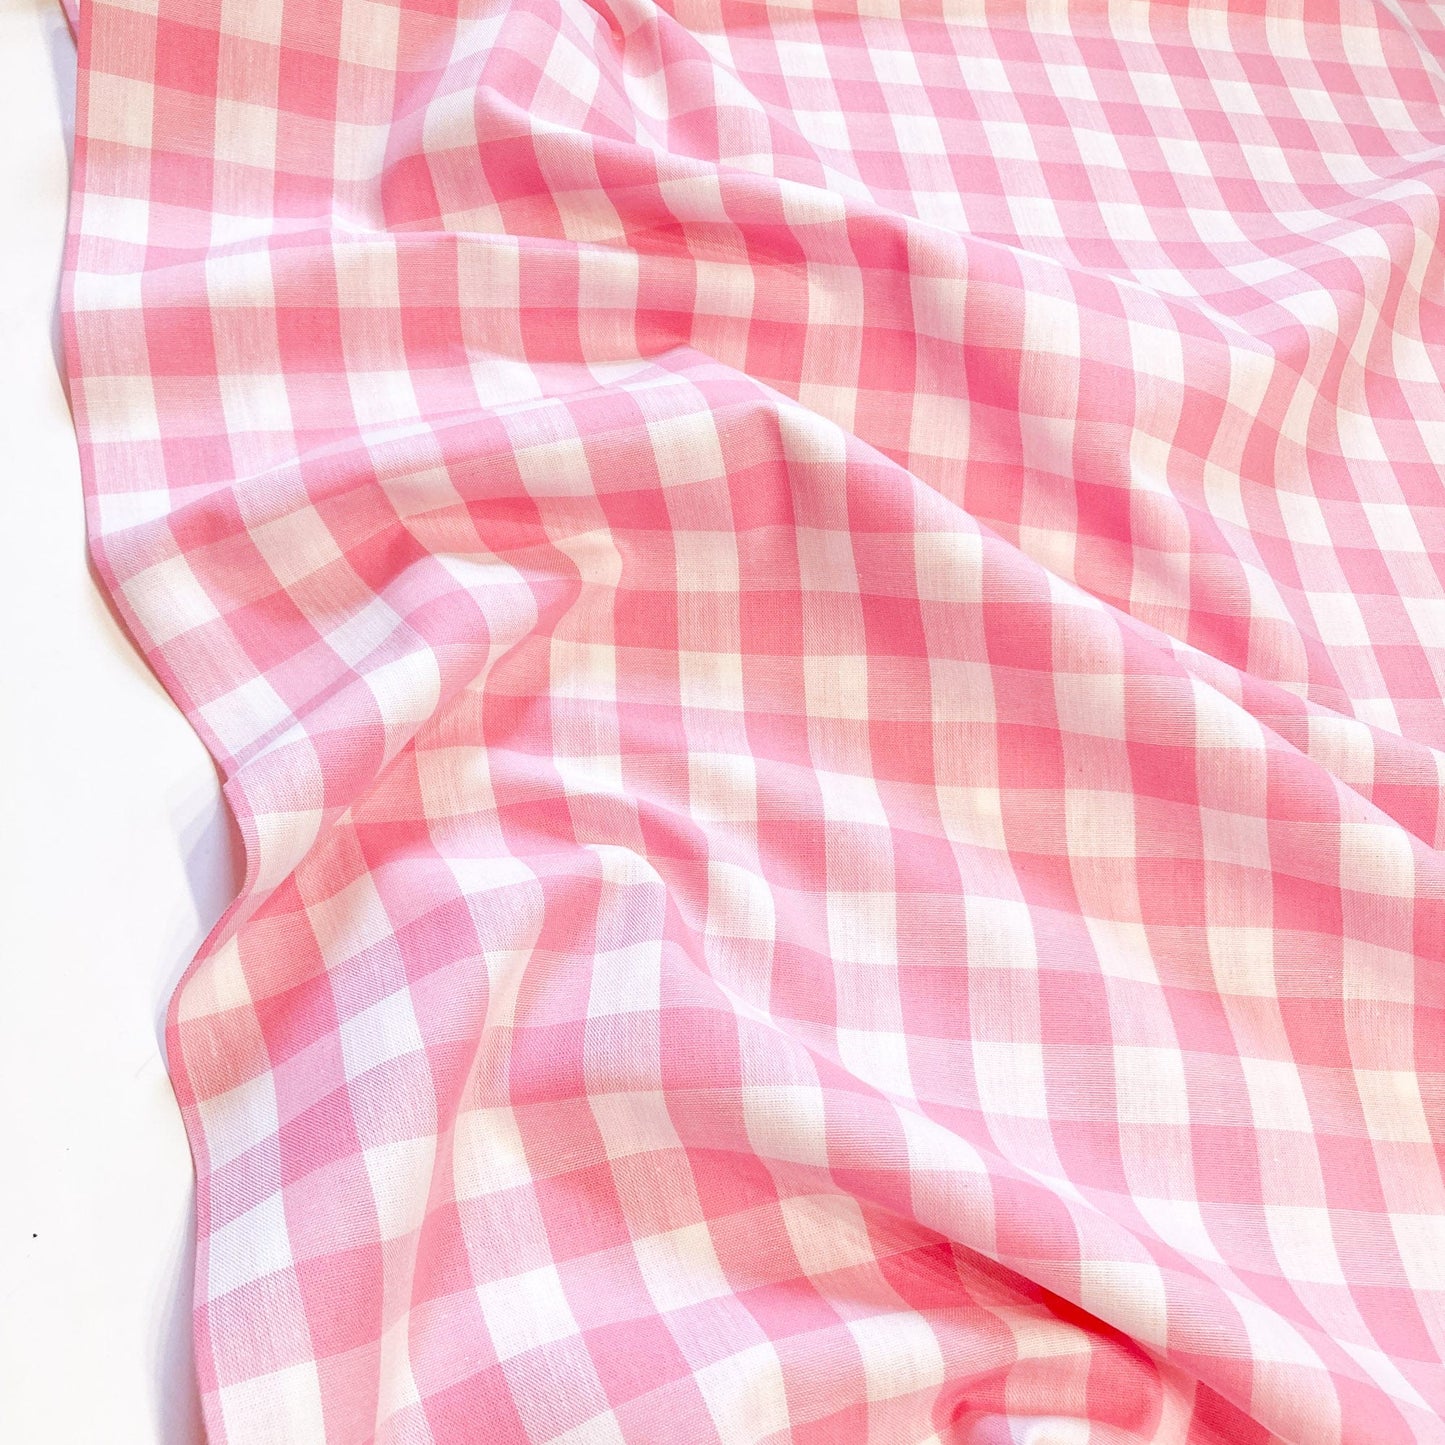 Cotton Gingham in Pink and White 15mm Check